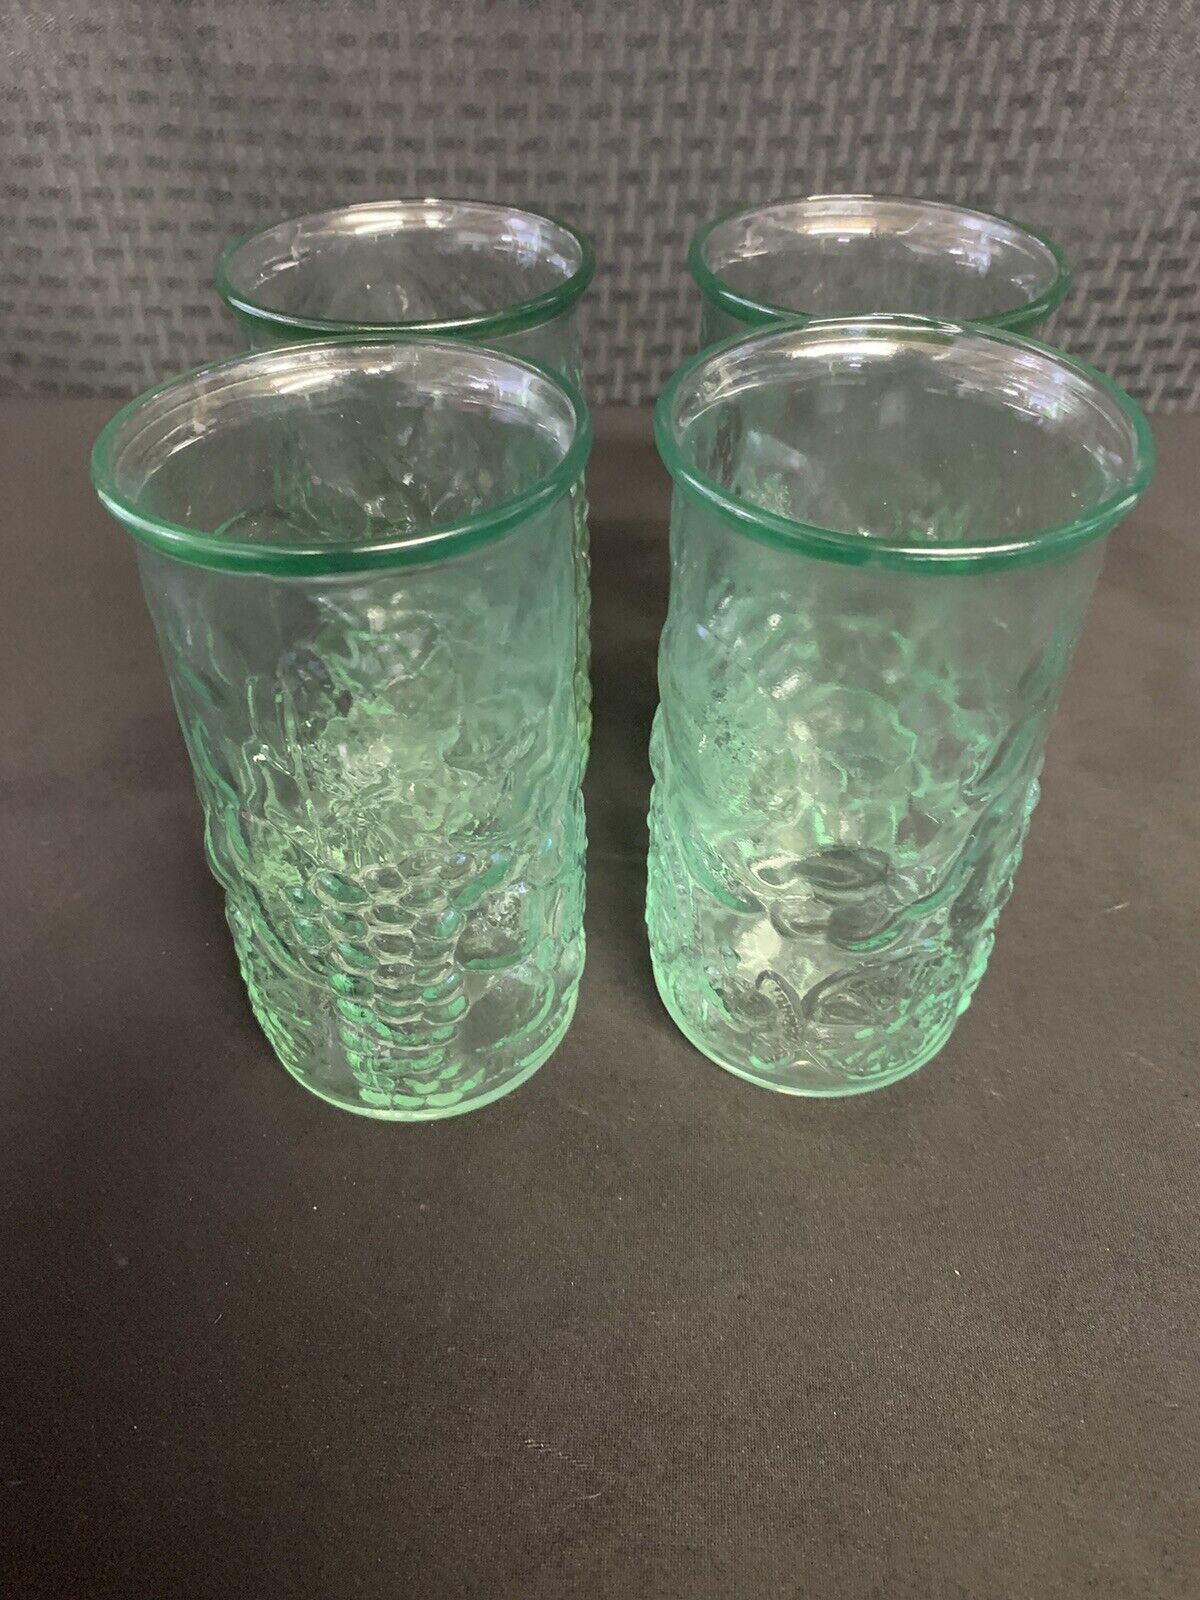 Pale Green Glass Embossed Fruit Tumblers Veteria Etrusca Italy/ Rare Find